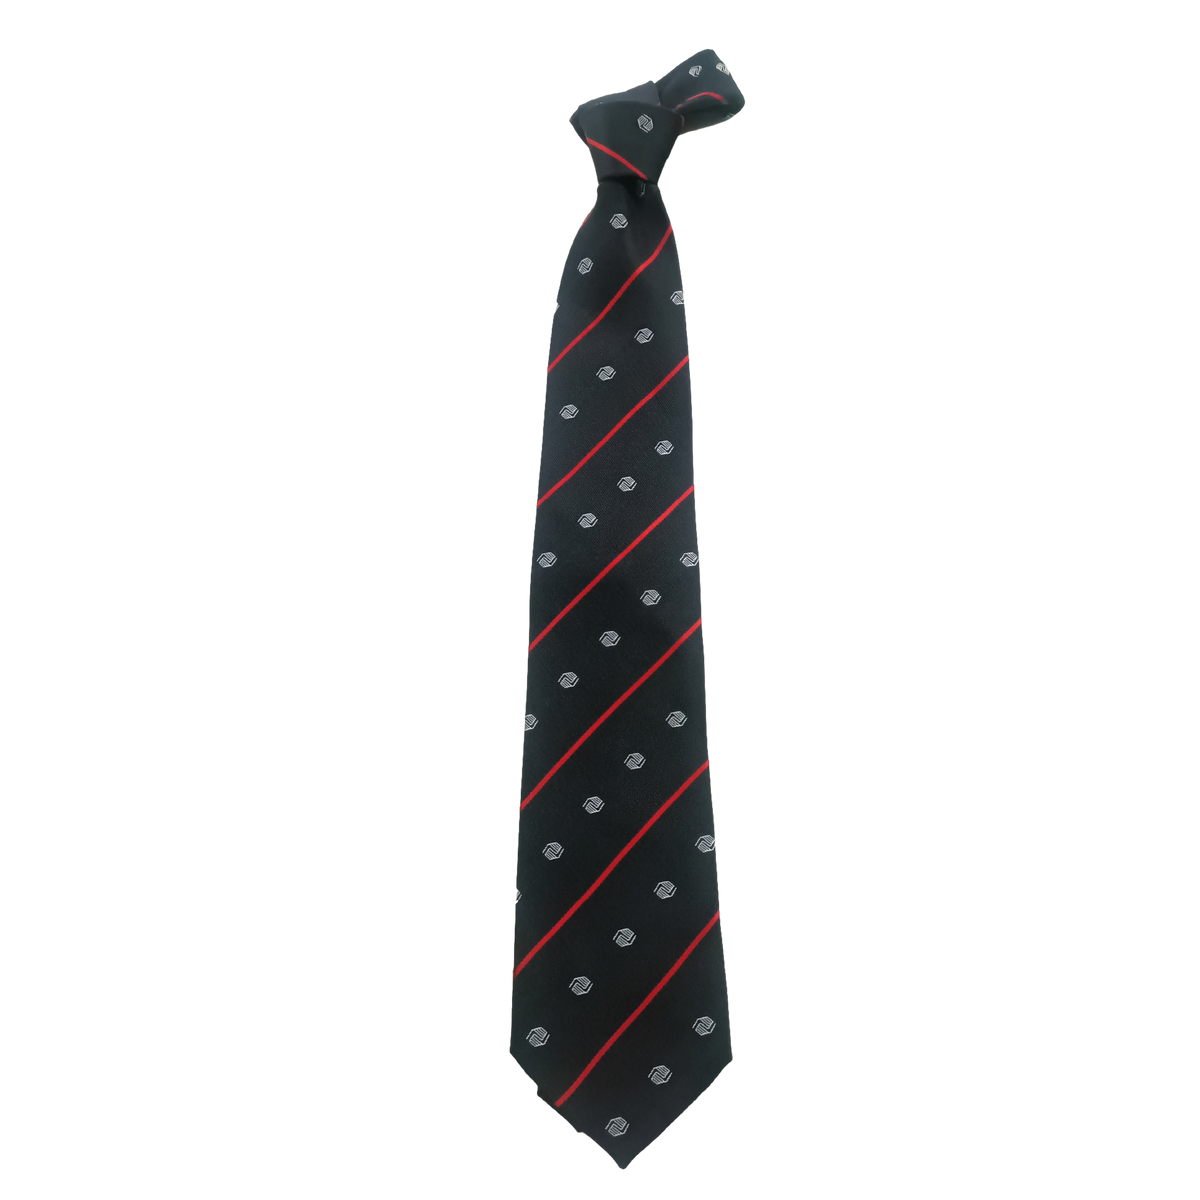 Woven Tie - Navy with Red Stripe